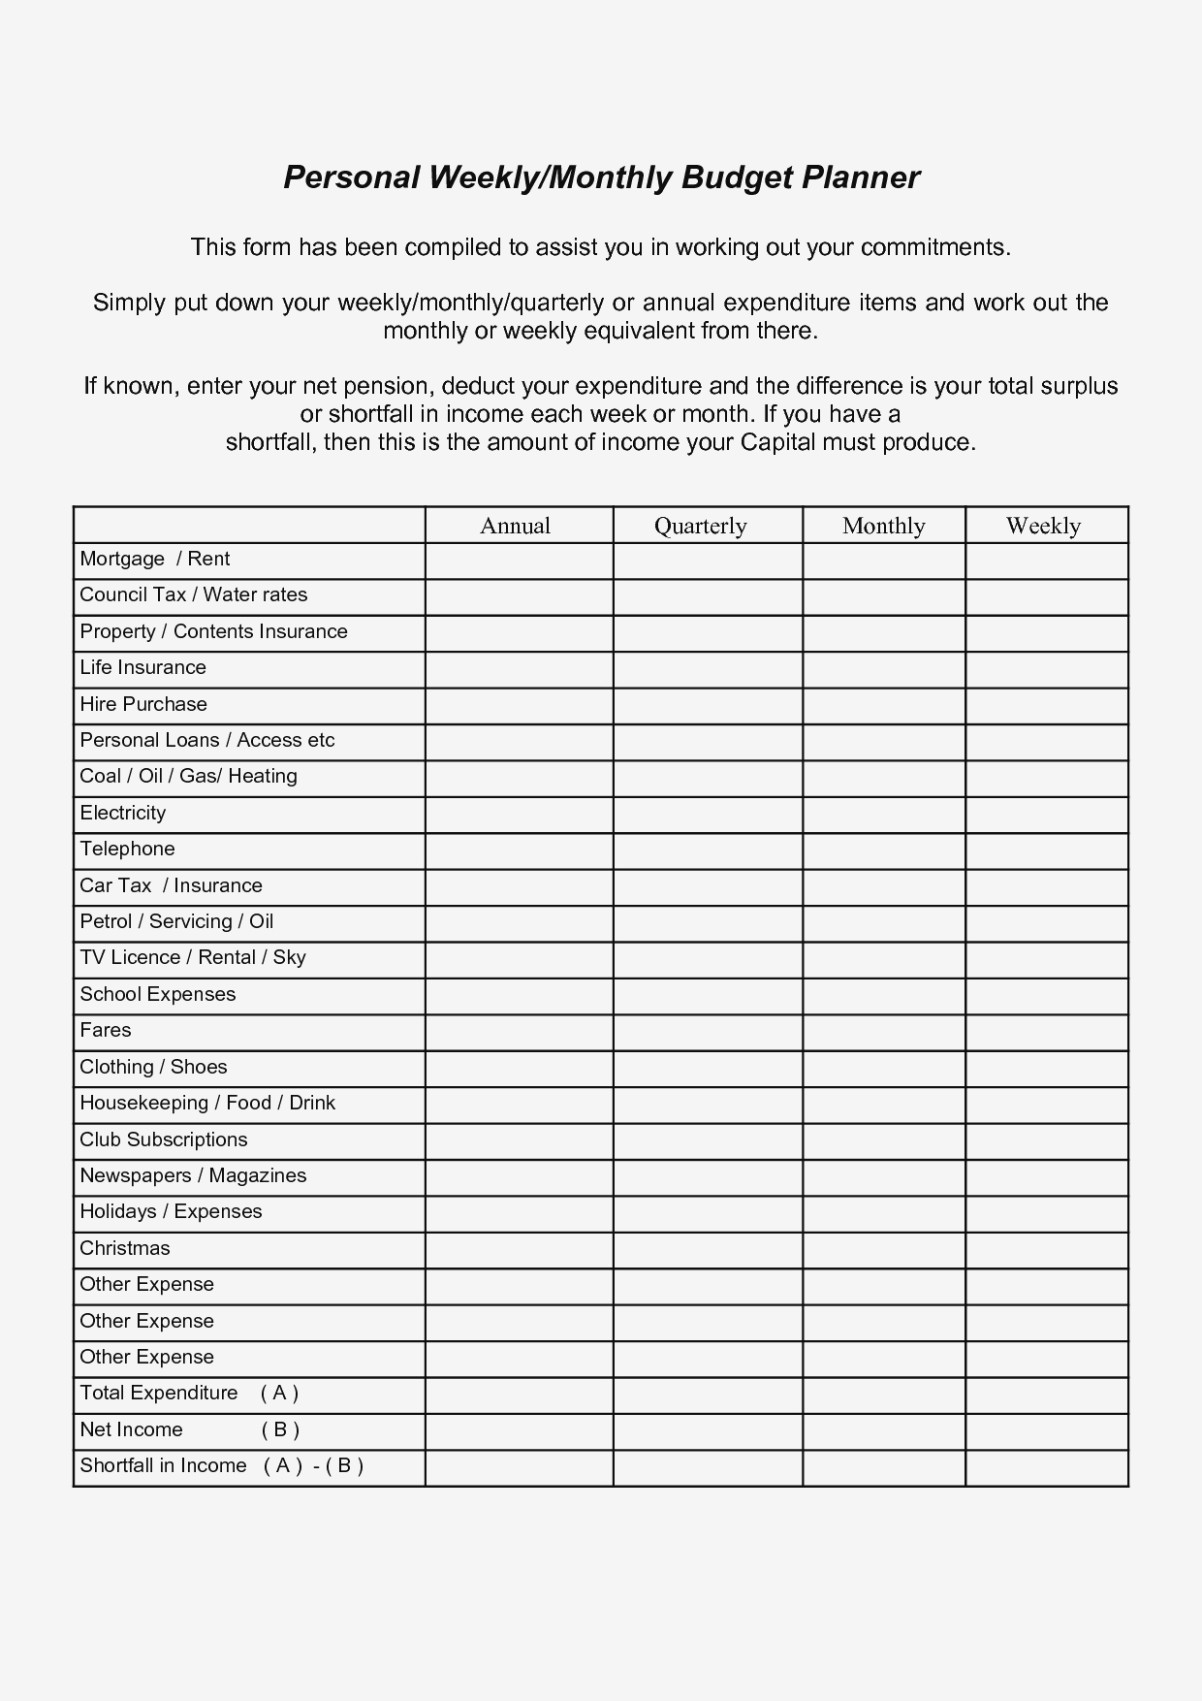 Salvation Army Donation Guide Spreadsheet Intended For Salvation Army Donation Guide Spreadsheet Unique Donation List For